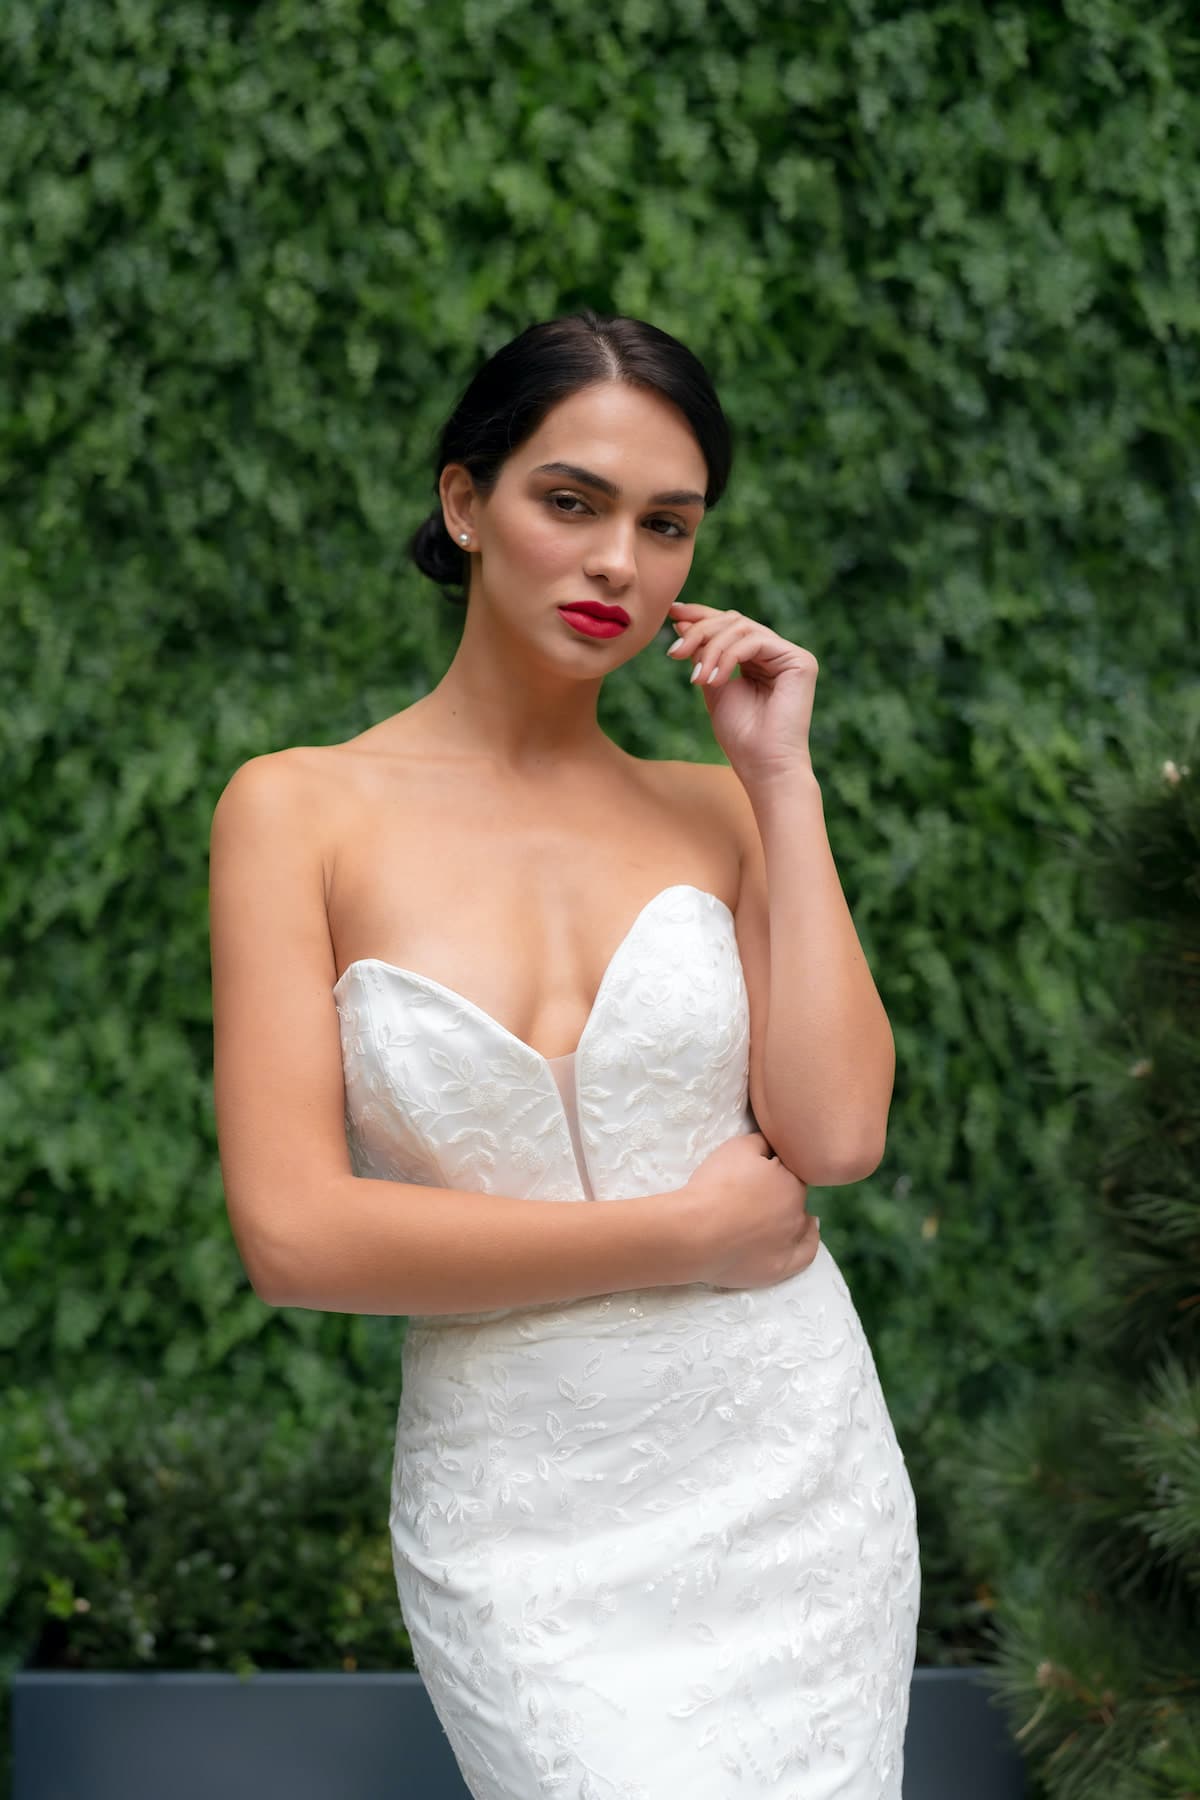 Designer Crafts a Reversible Wedding Dress for Brides That Can't